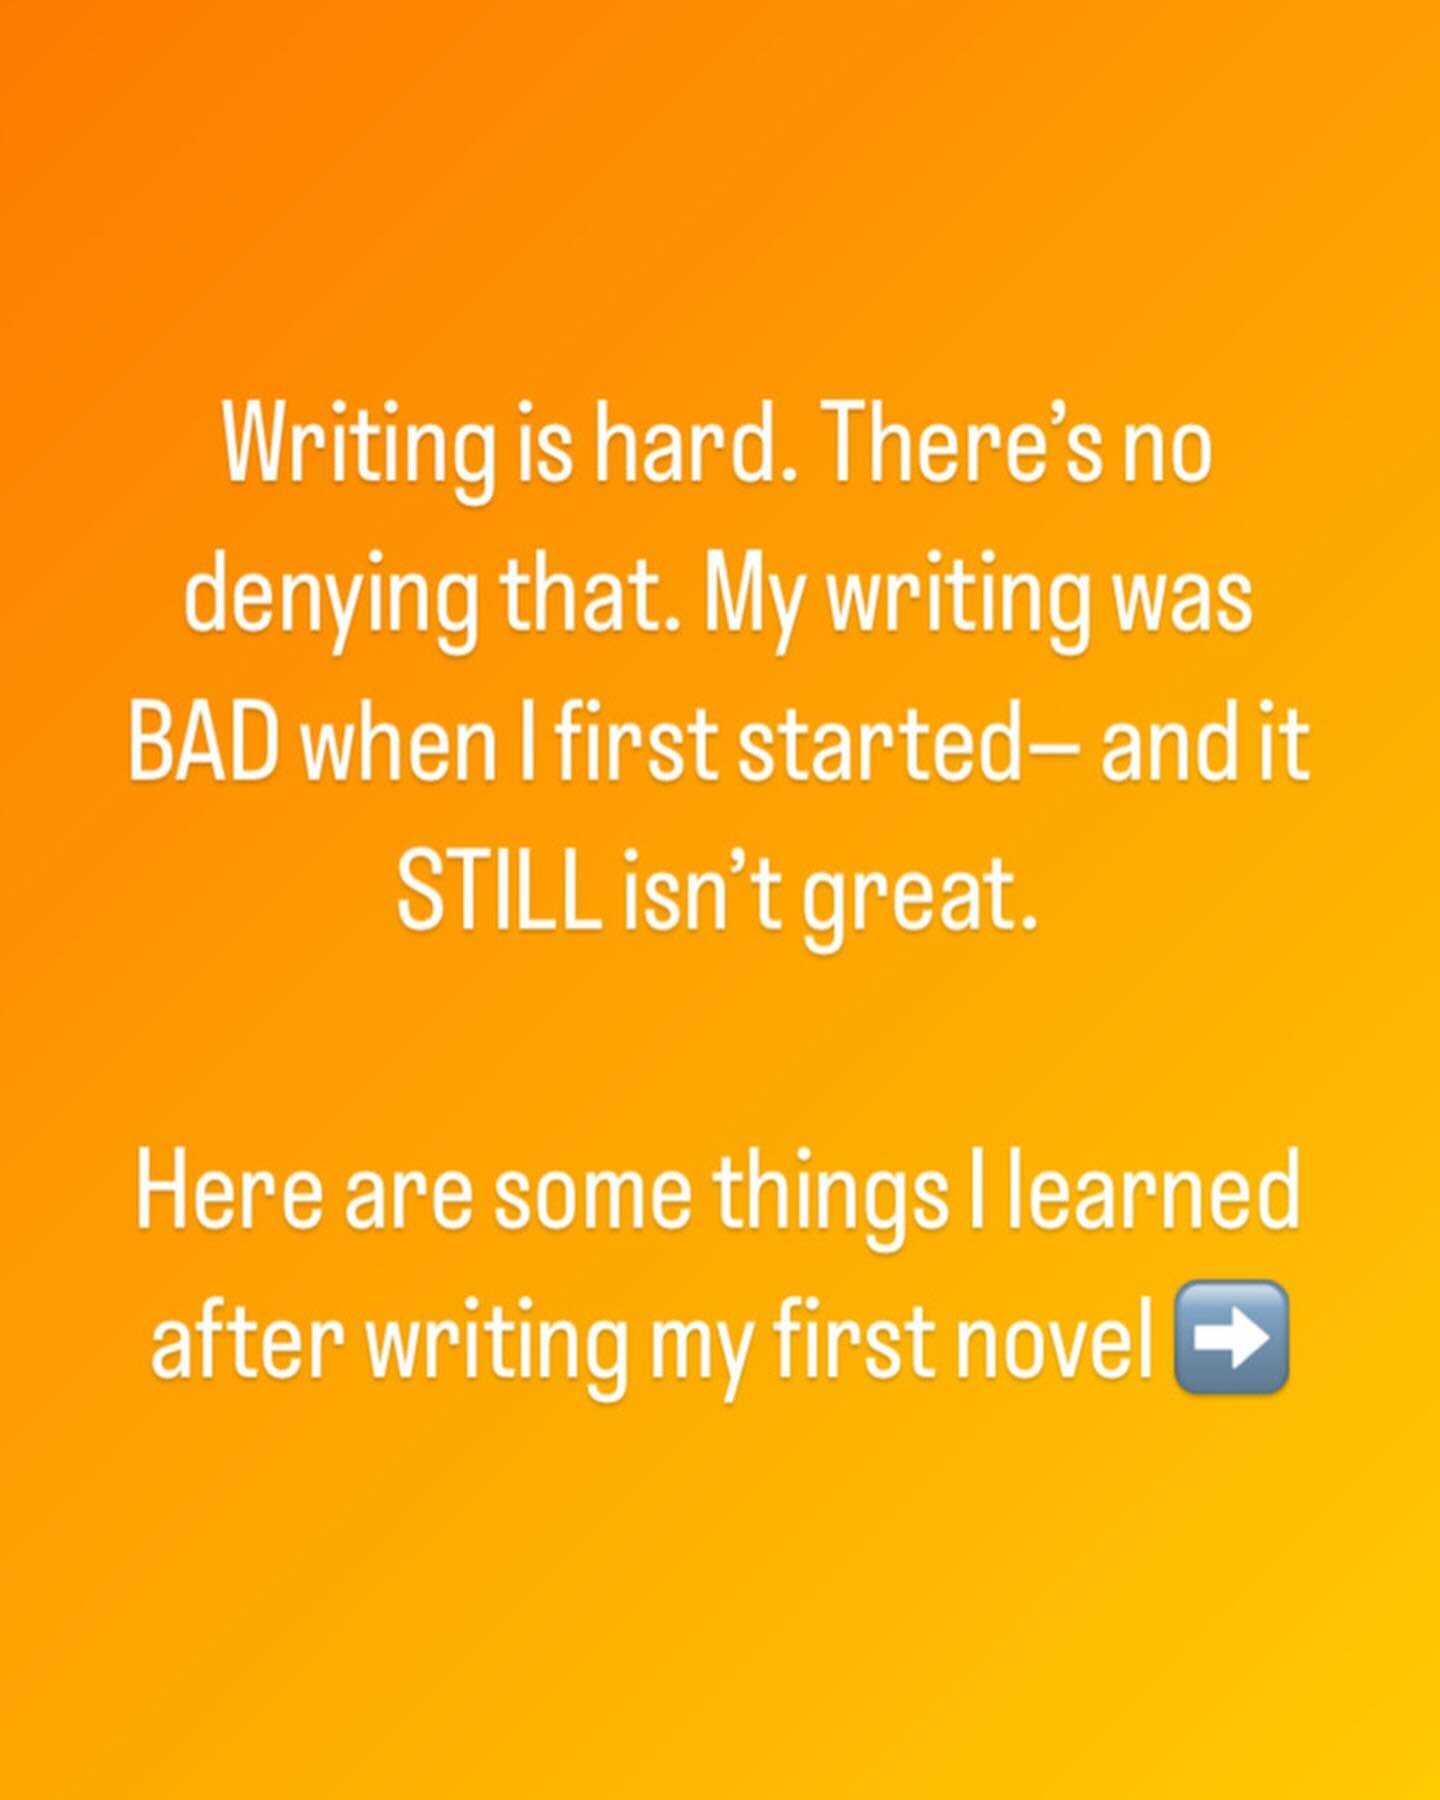 I&rsquo;ve learned a WHOLE lot after telling a consecutive story over 60k words. Here are some tips to follow:
1) SLOW DOWN: I got so excited to share my work with people that I had issues with grammar, overwriting, and obvious plot holes. Make sure 